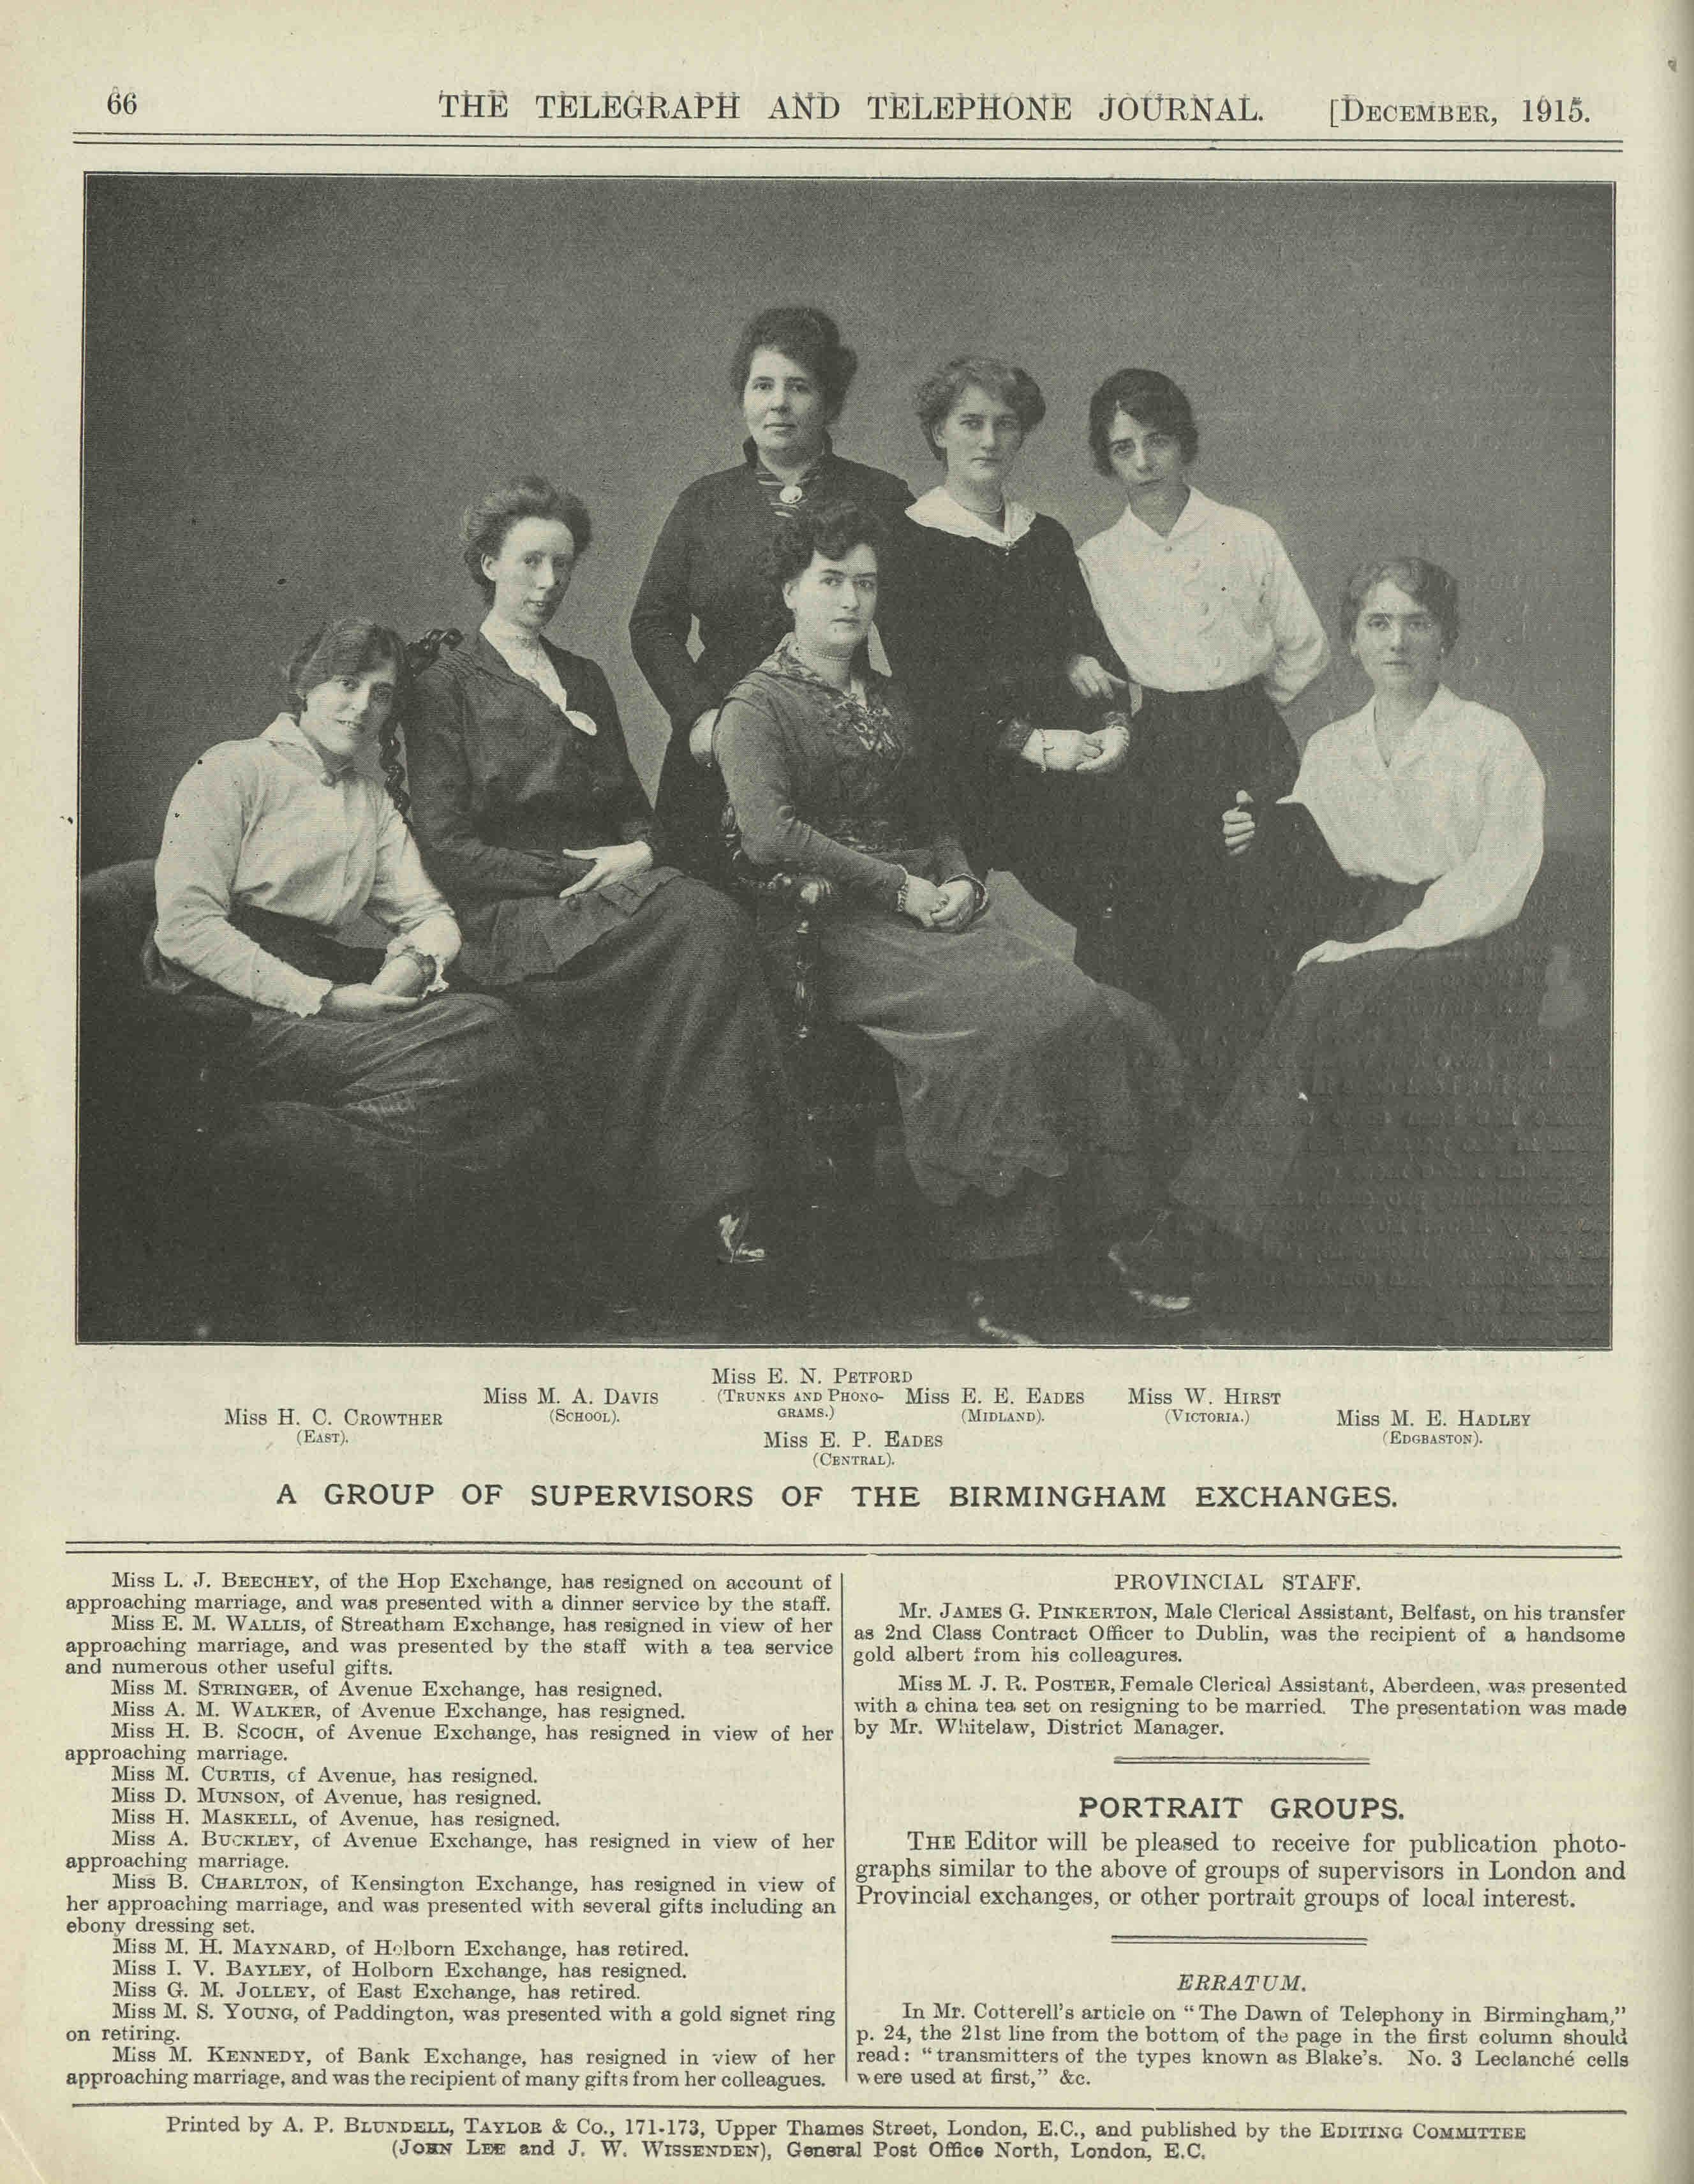 Page from The Telegraph and Telephone Journal, Dec 1915, including a photograph of a group of supervisors at the Birmingham exchange